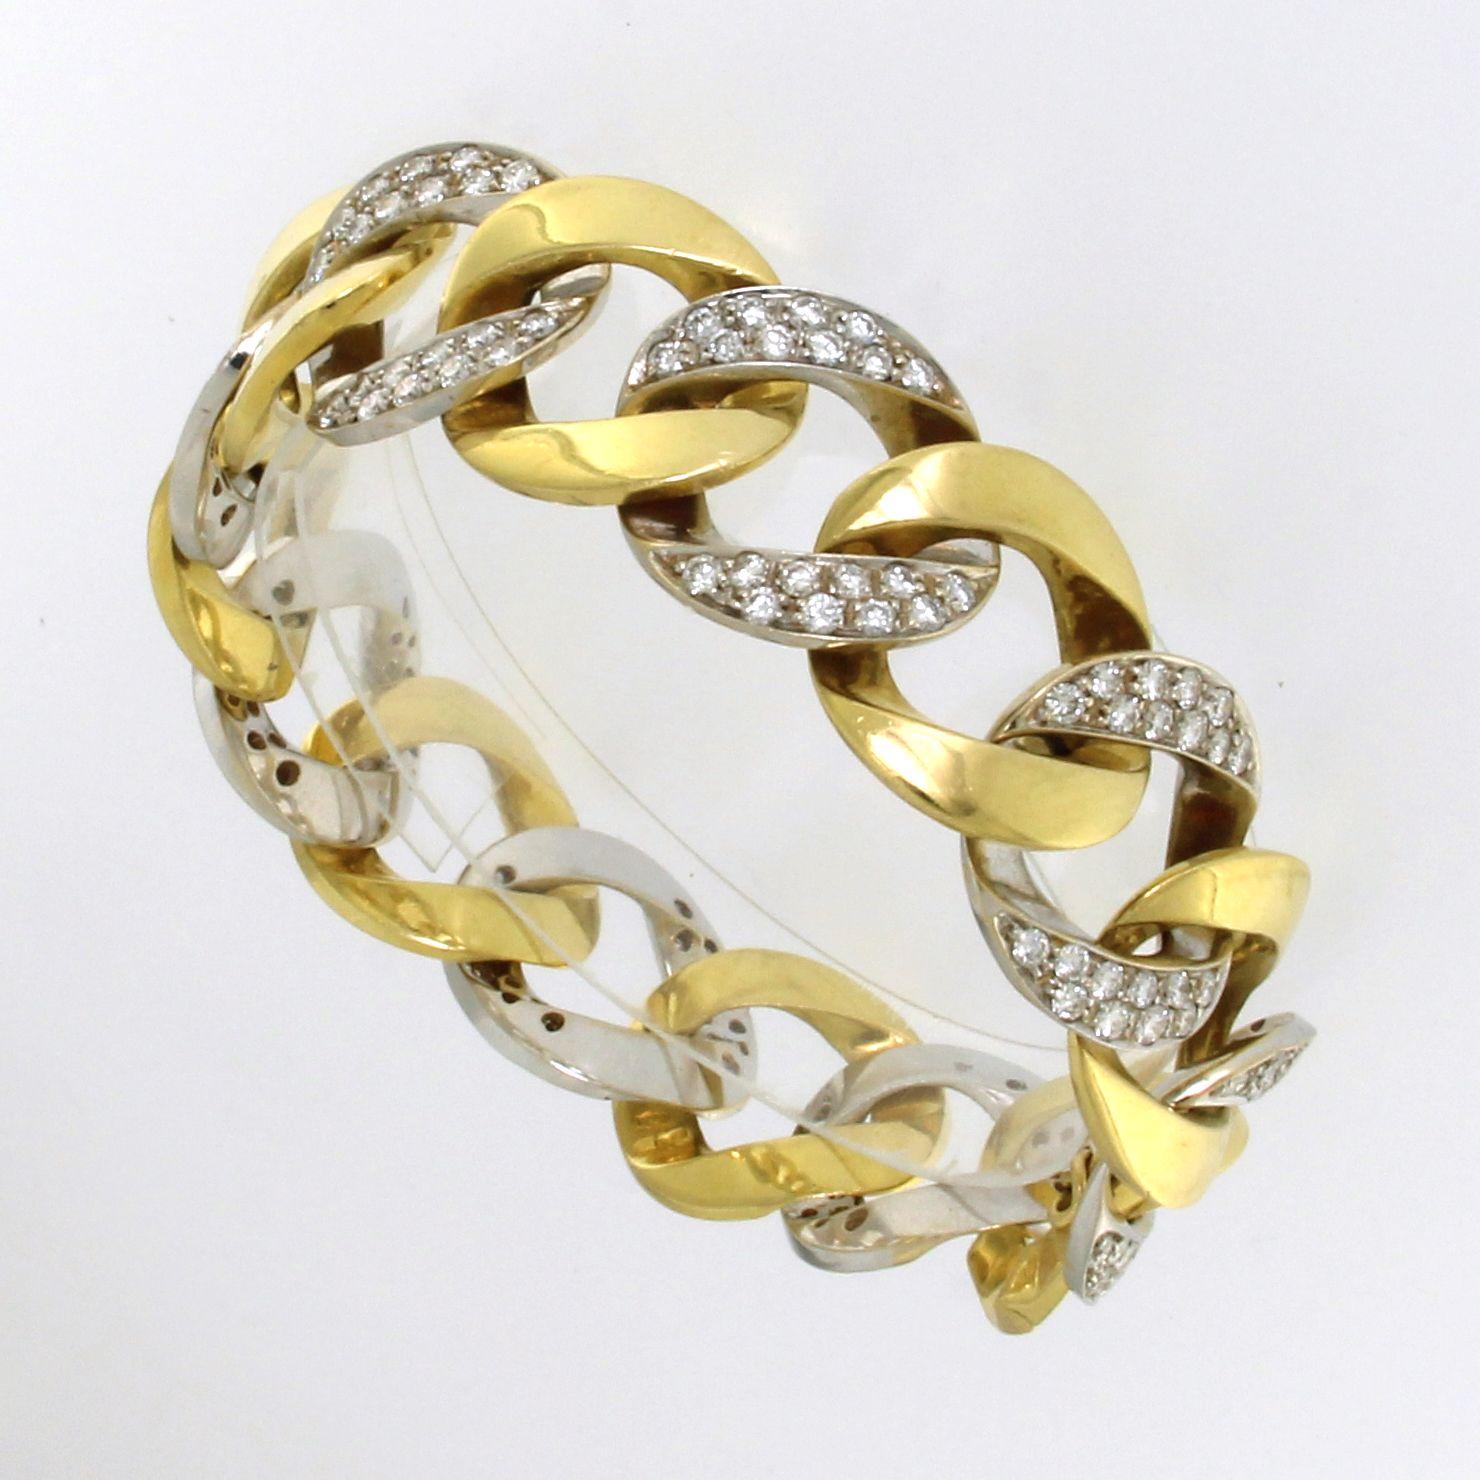 Classic groumette bracelet , solid links shiny and pavè alternated.
Totale gold weight g. 71
Diamonds ct. 4.80
